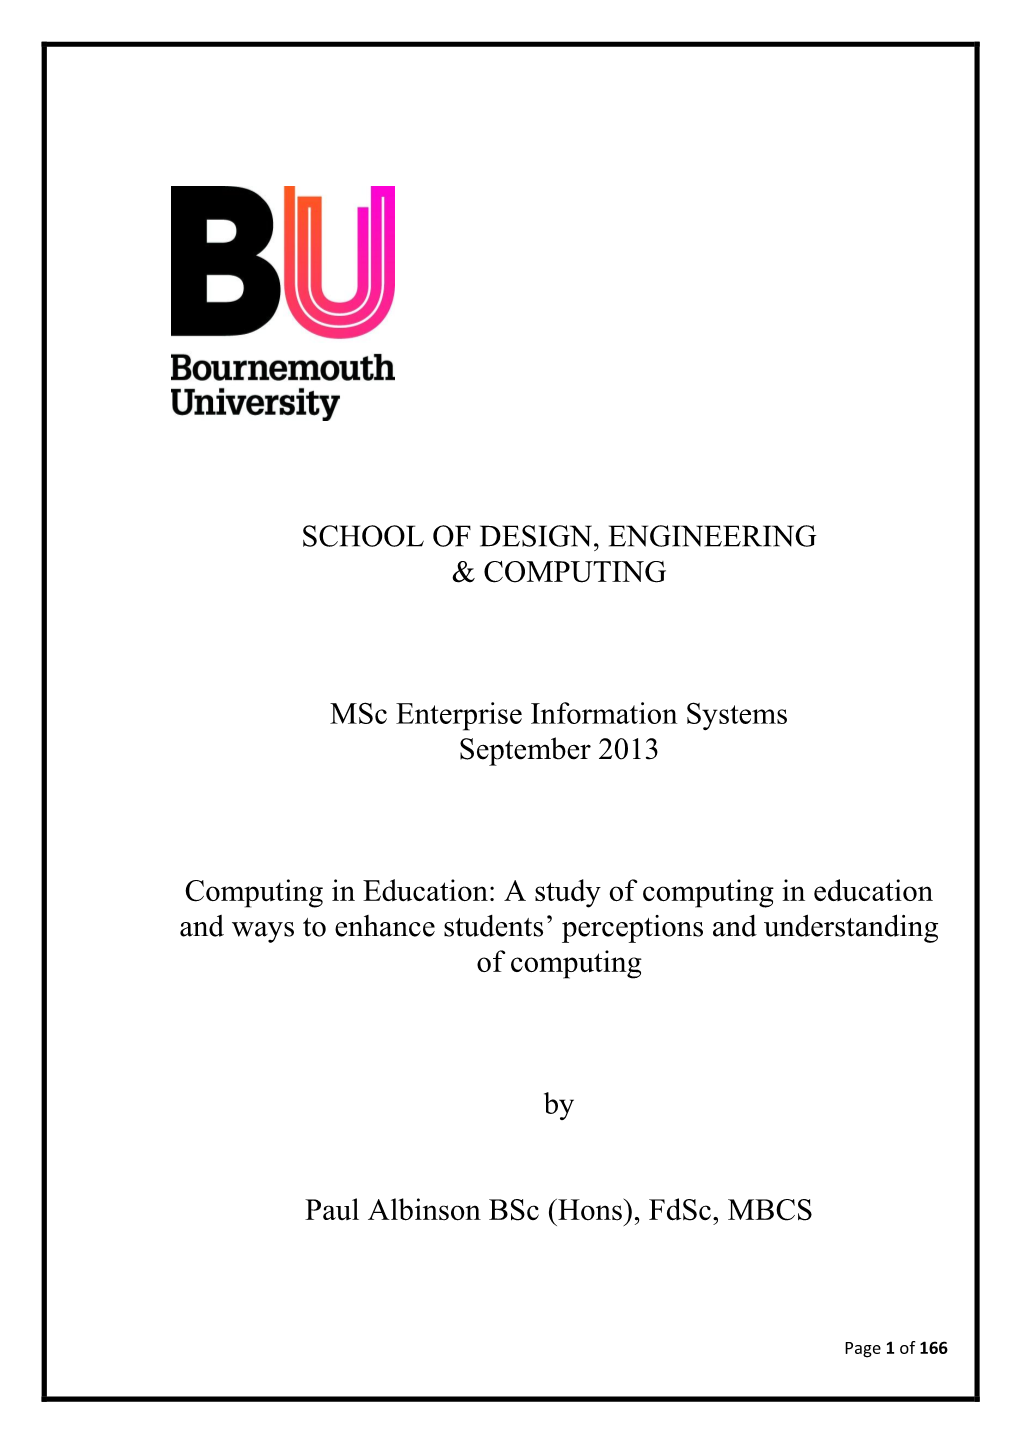 A Study of Computing in Education and Ways to Enhance Students’ Perceptions and Understanding of Computing